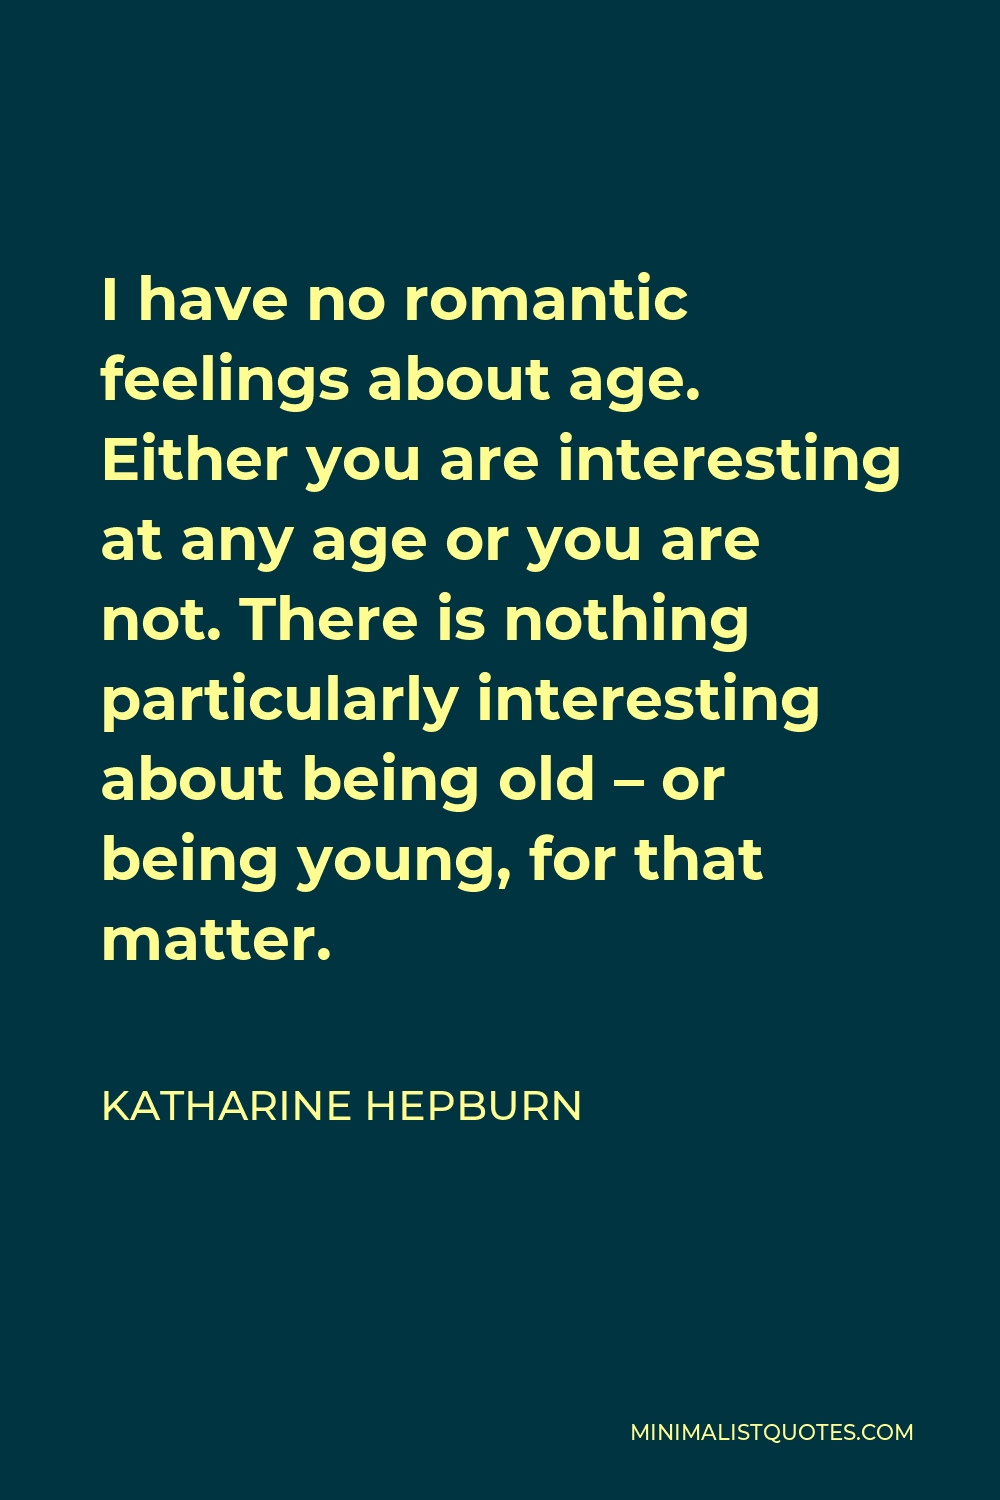 Katharine Hepburn Quote - I have no romantic feelings about age. Either you are interesting at any age or you are not. There is nothing particularly interesting about being old – or being young, for that matter.